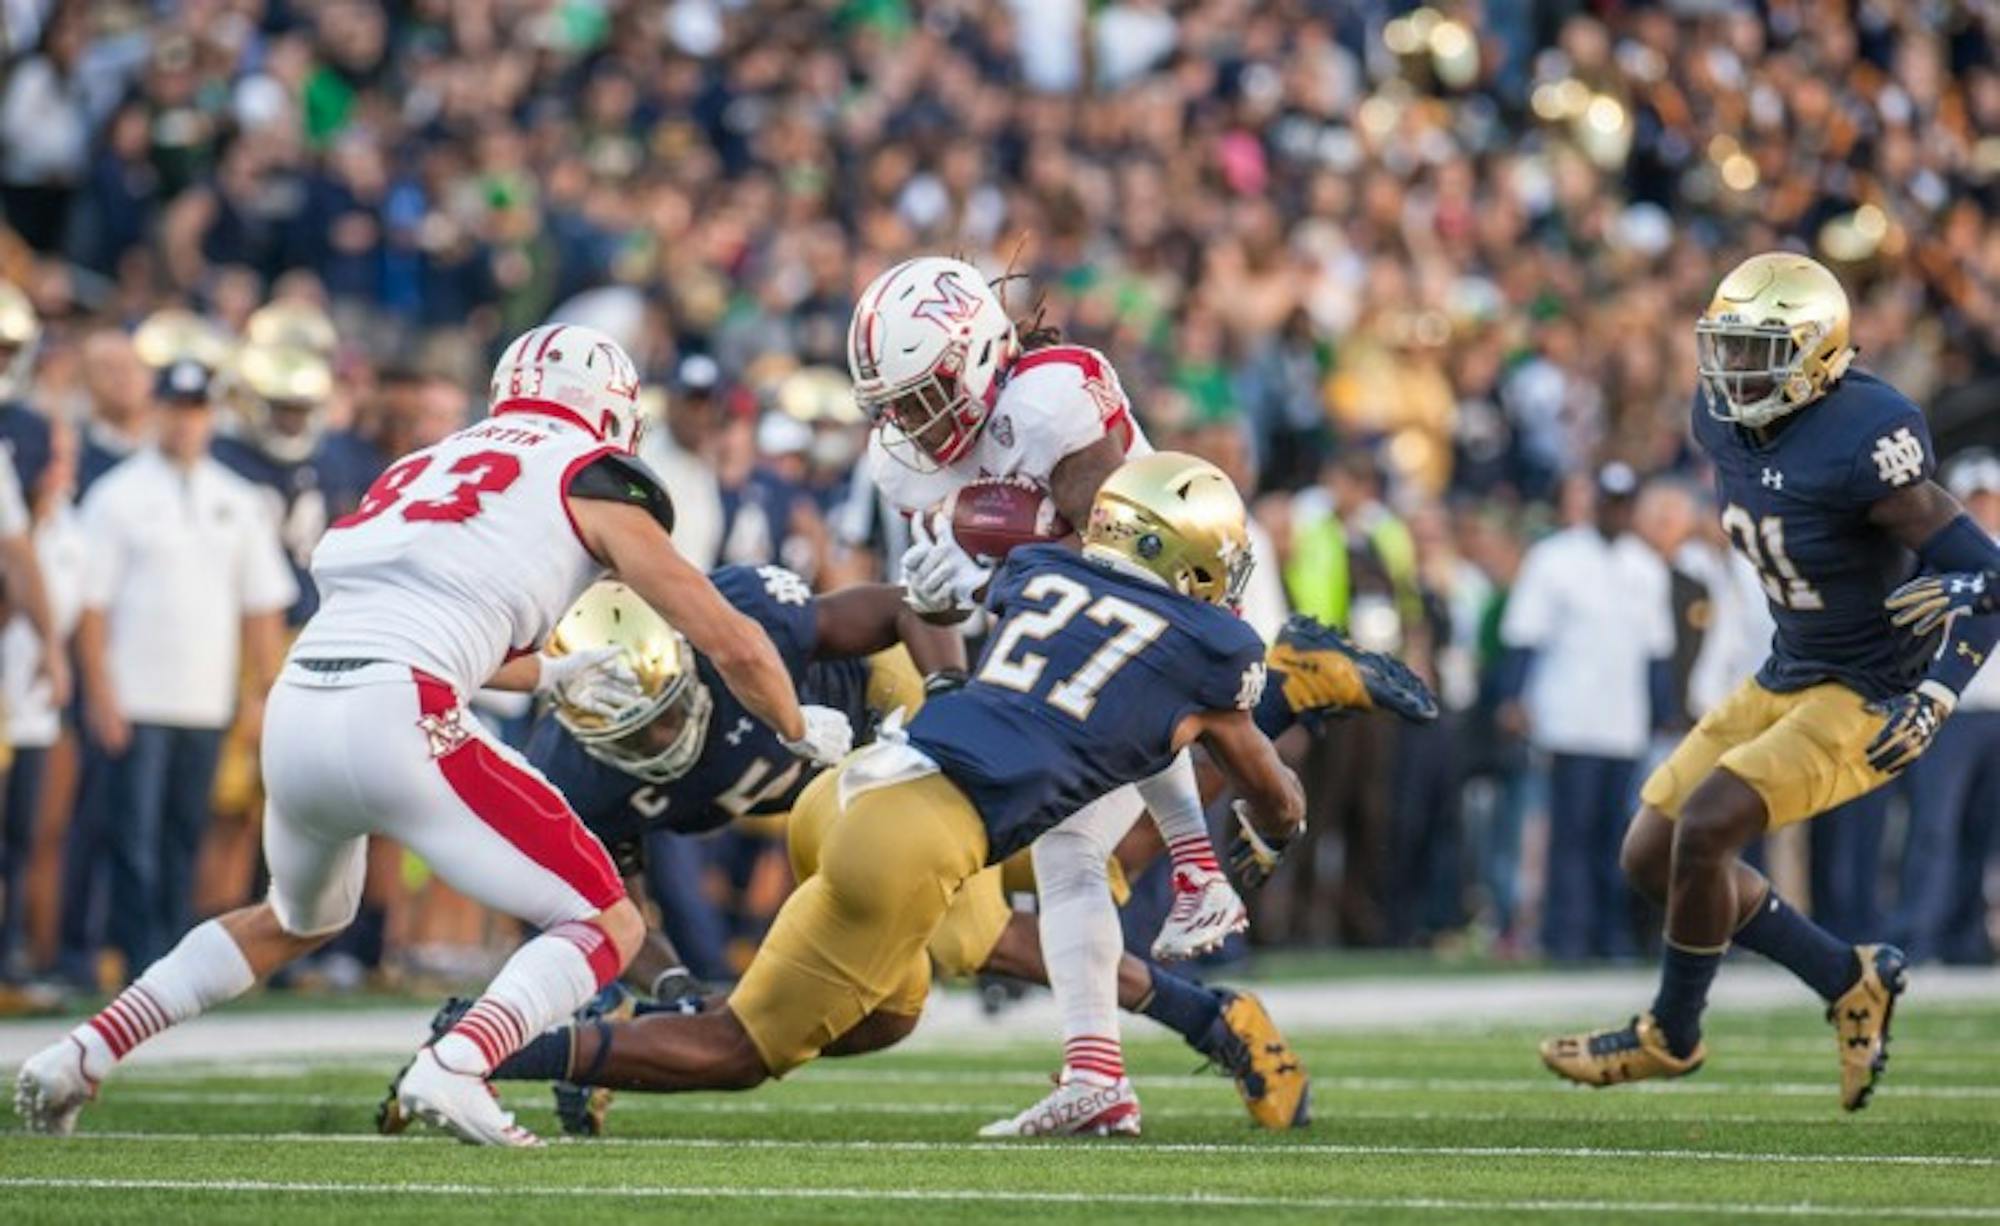 Irish sophomore cornerback Julian Love makes a tackle during Notre Dame’s 52-17 victory over Miami (OH) on Sept. 30. Love has 27 tackles and one interception on the year.